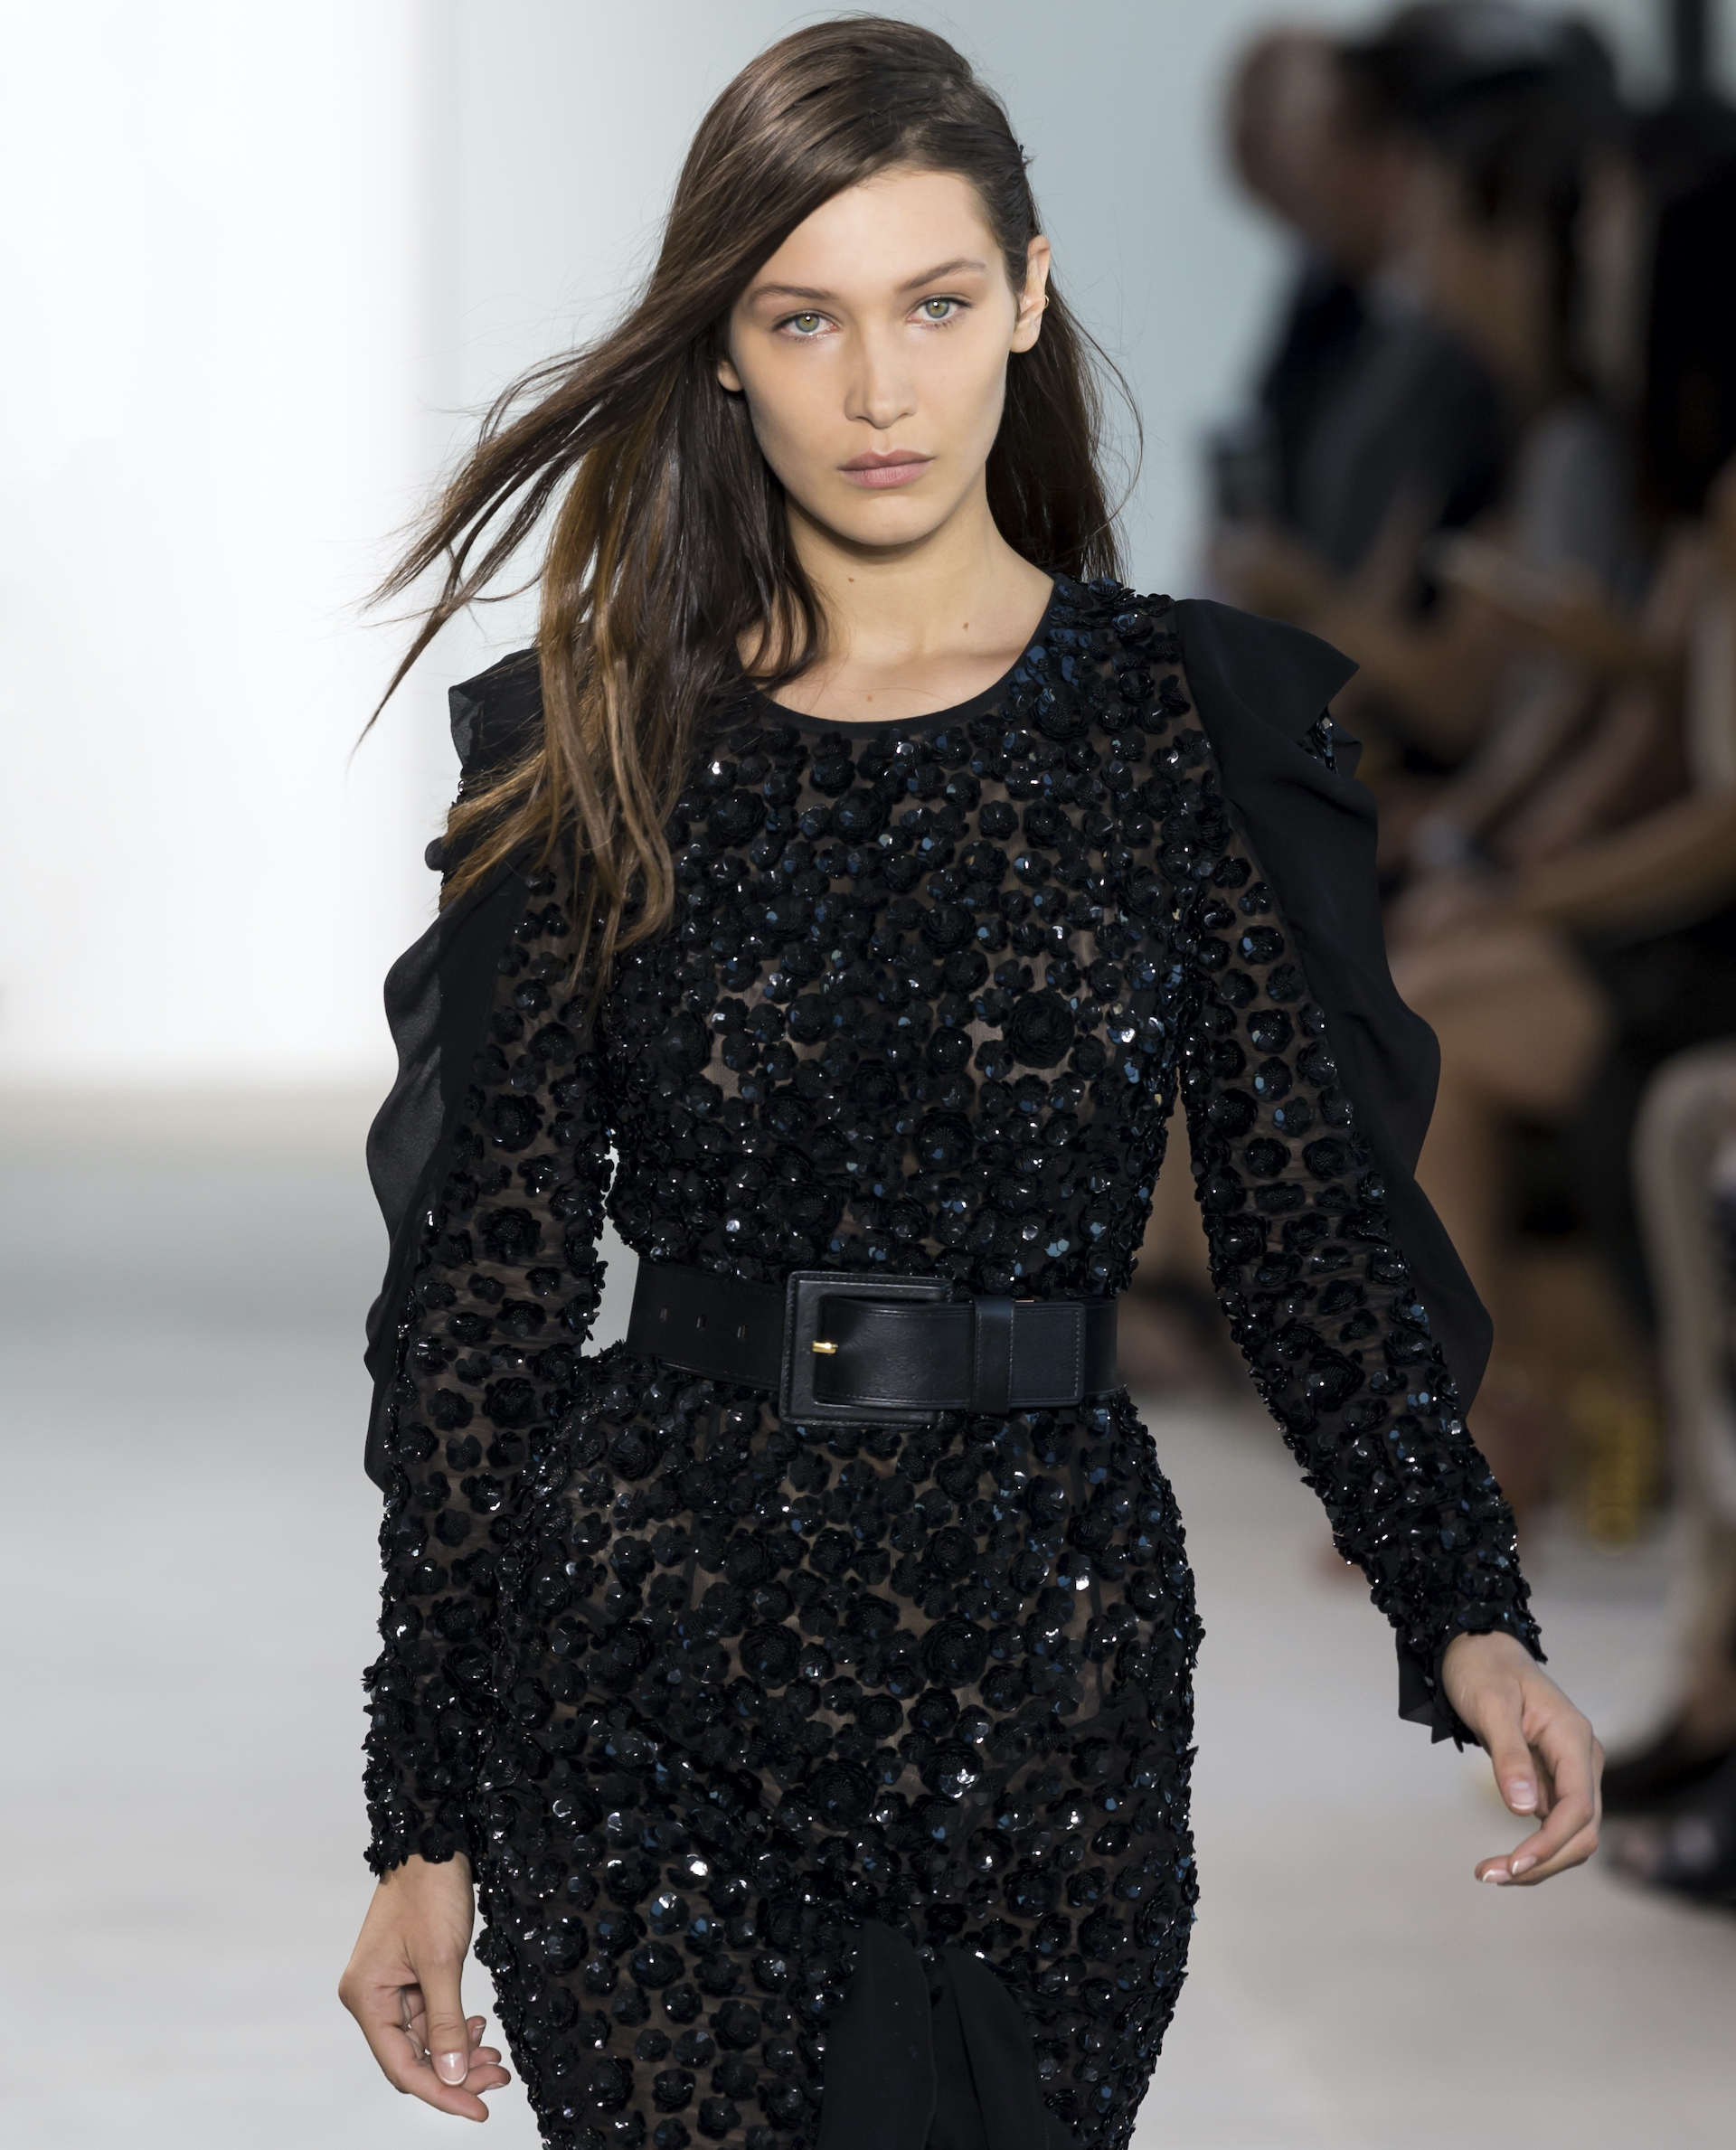 The audience's jaws dropped when seeing the evolution of Bella Hadid's spray-on dress in the middle of the Coperni fashion show in Paris.